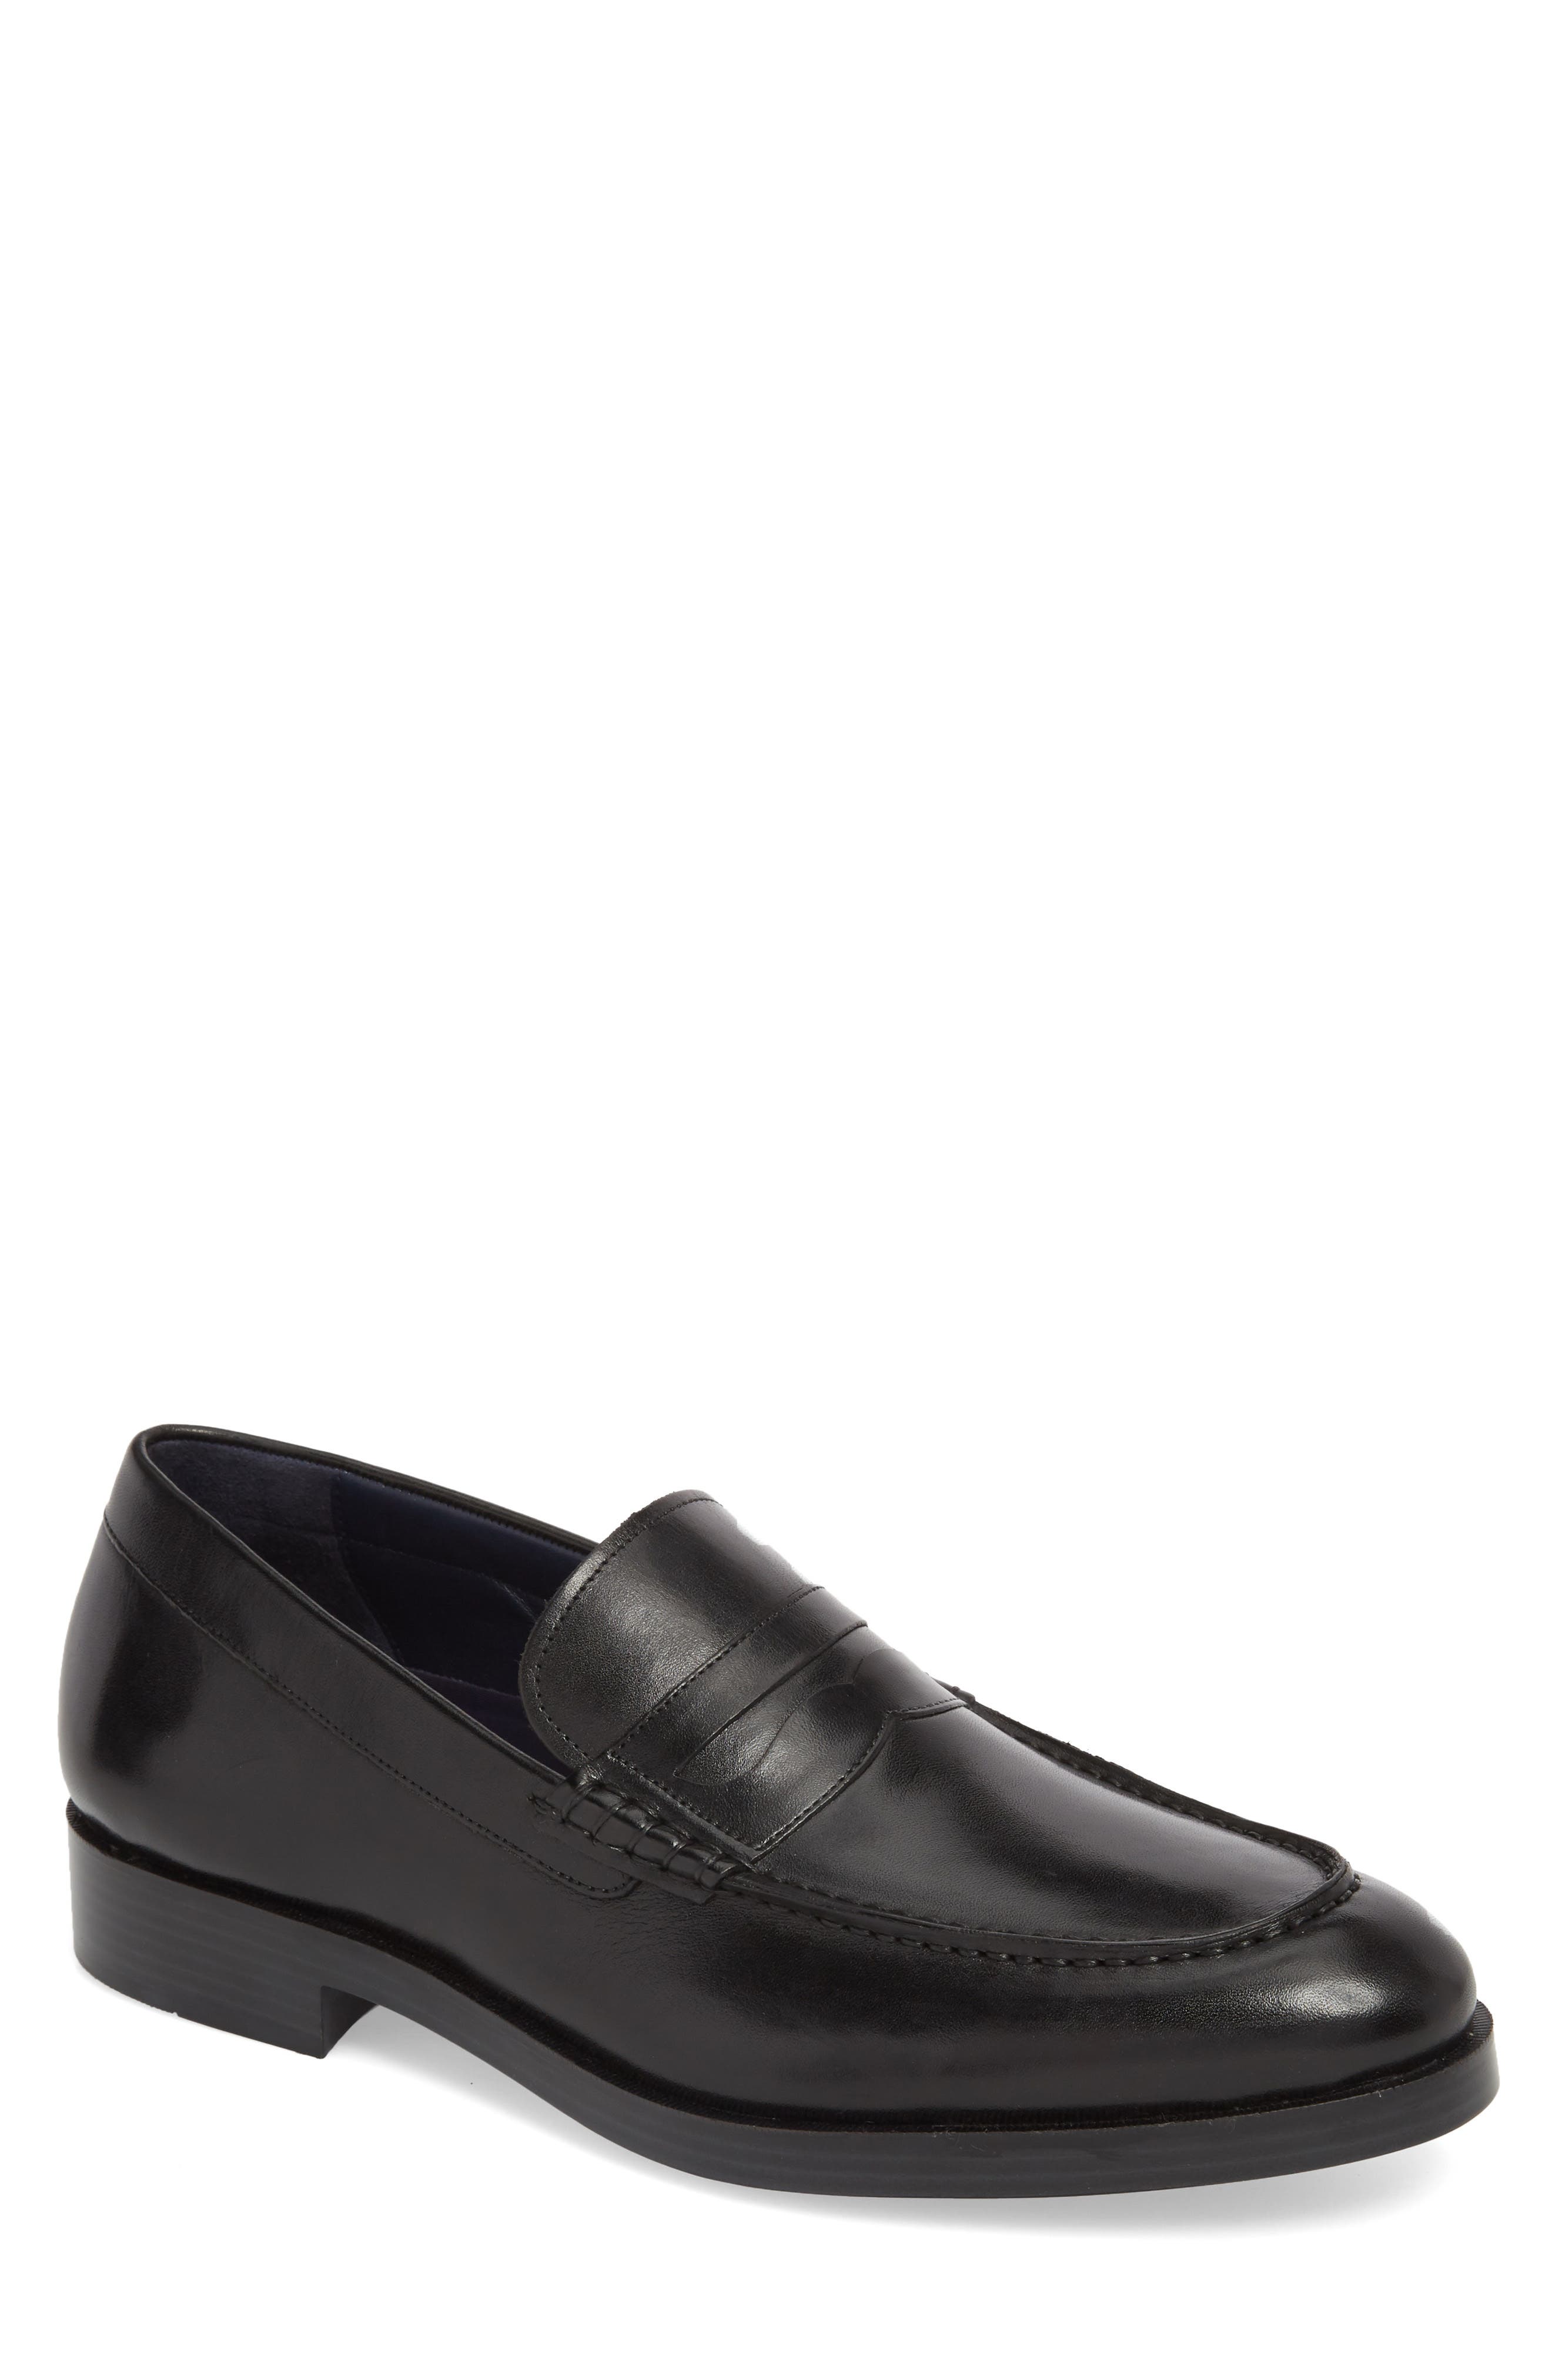 cole haan loafers black